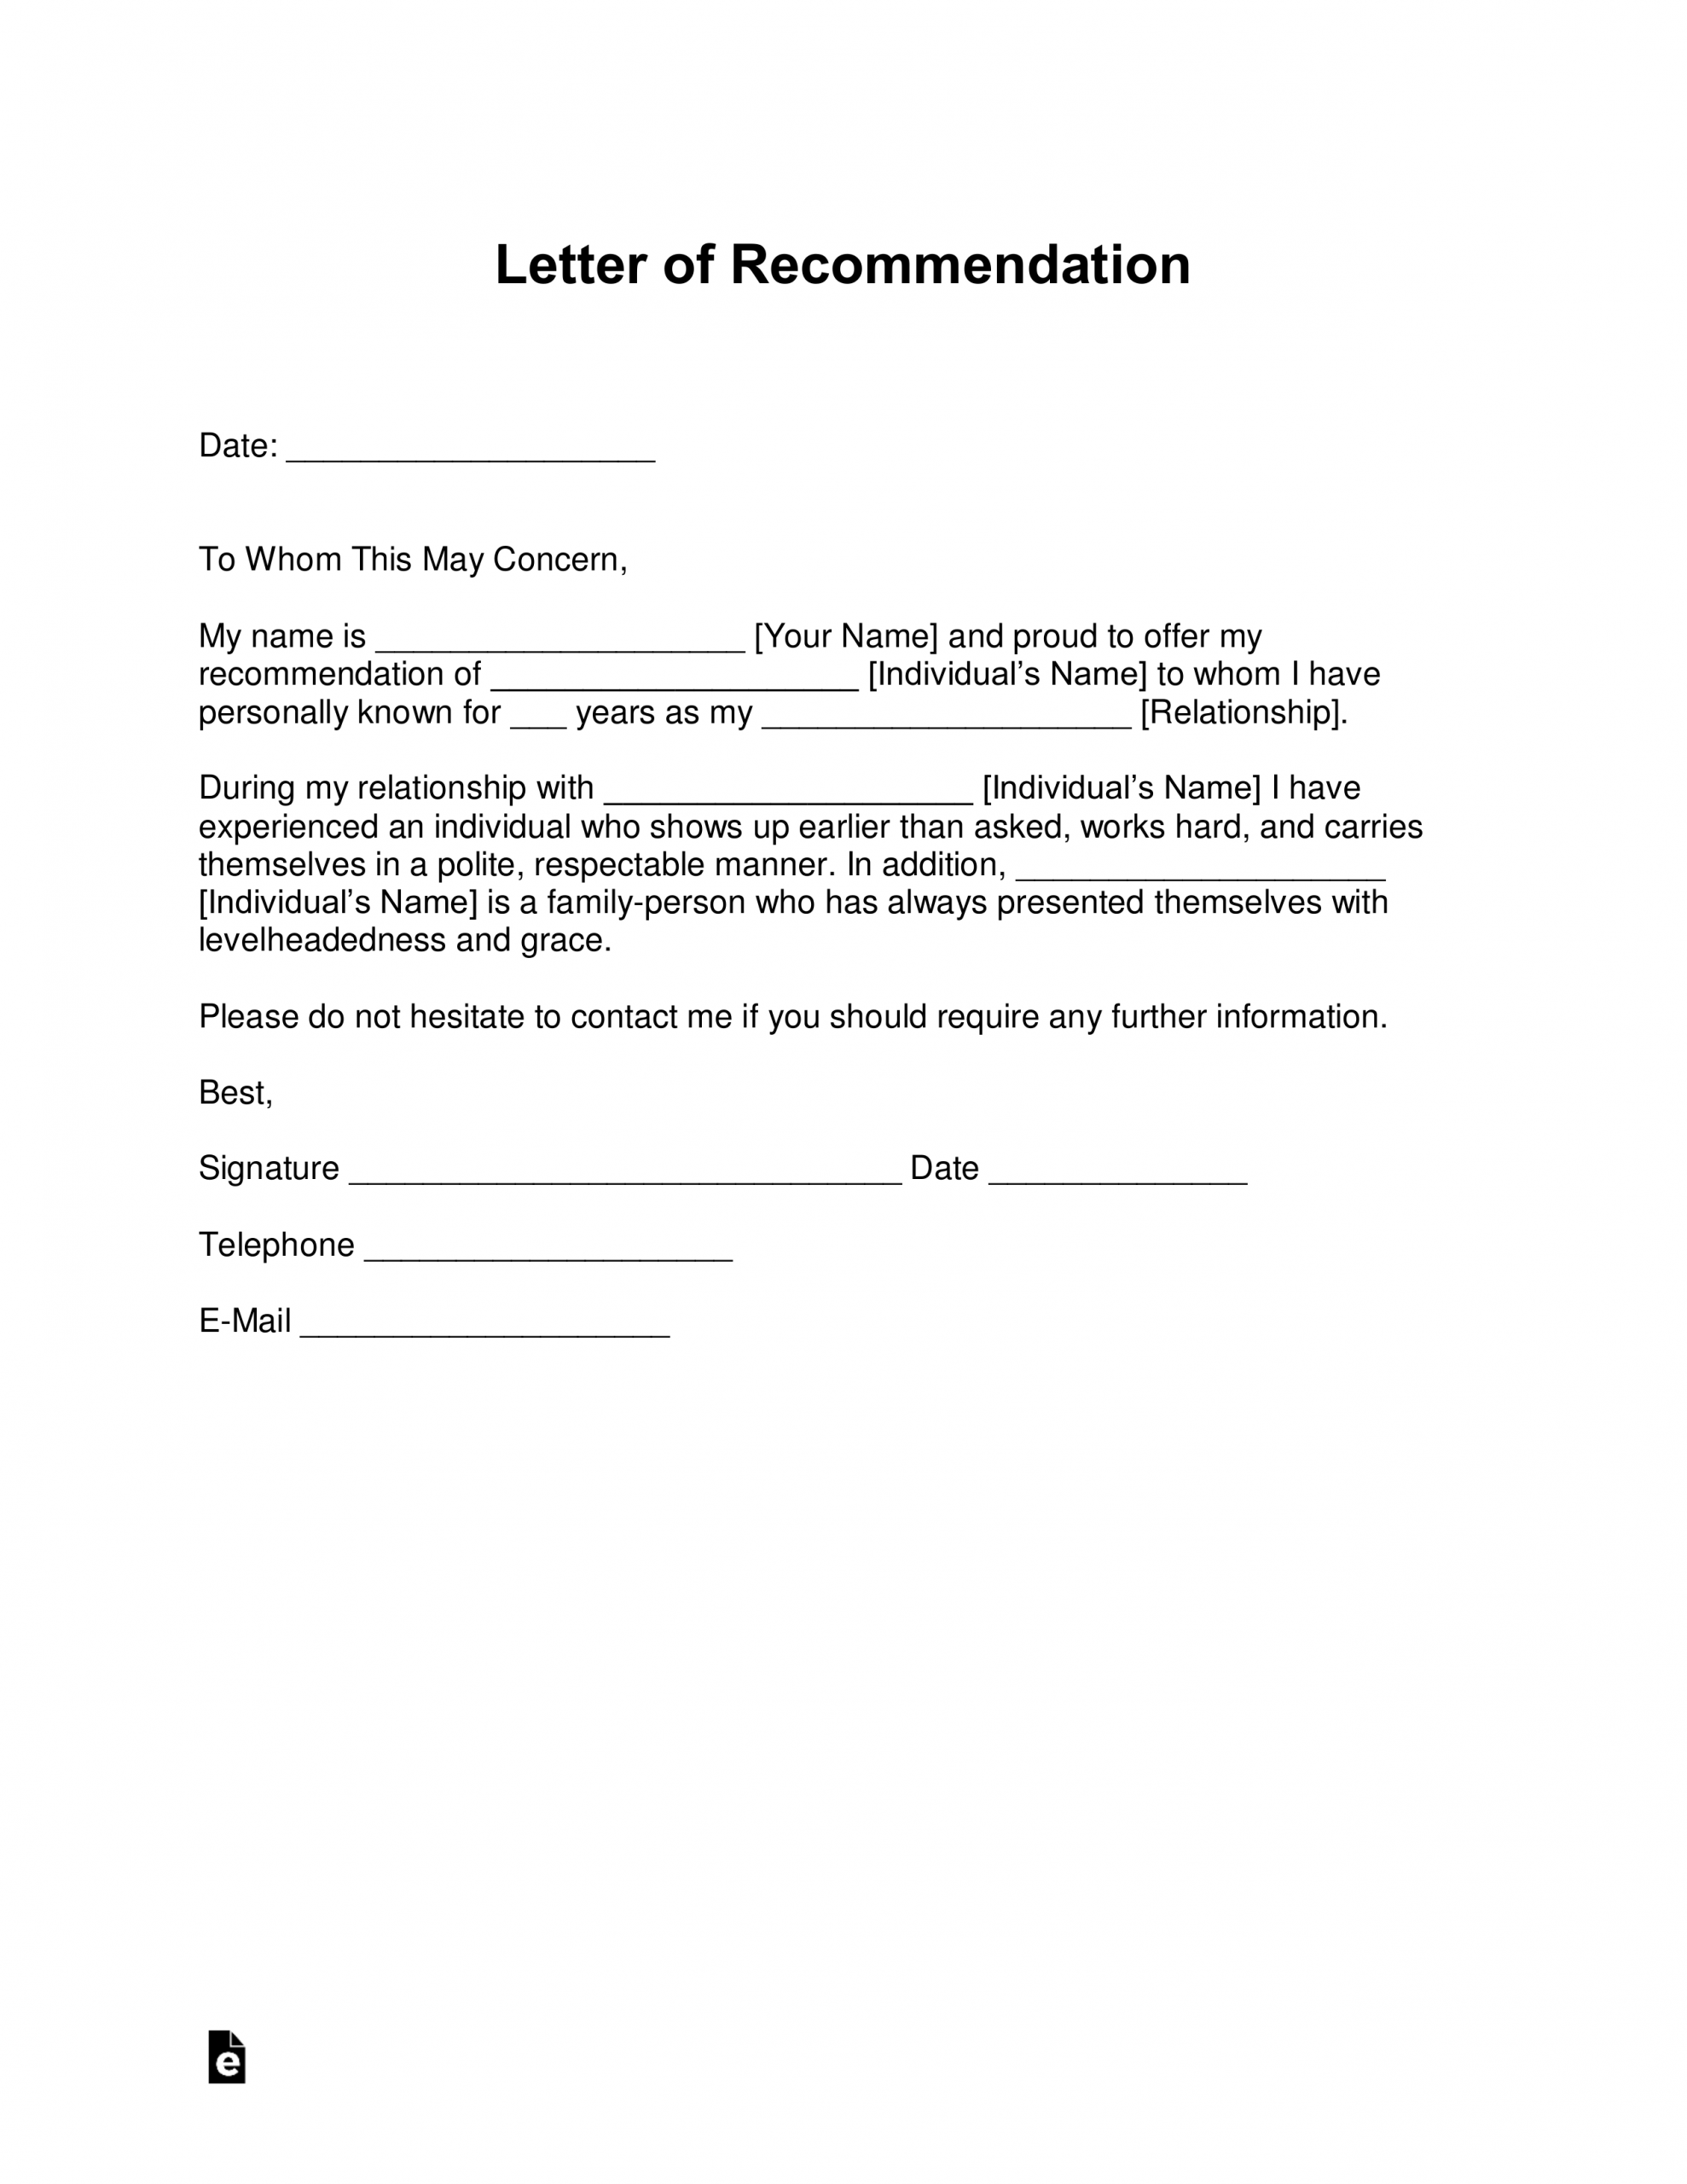 Free Letter Of Recommendation Templates Samples And inside size 2550 X 3301